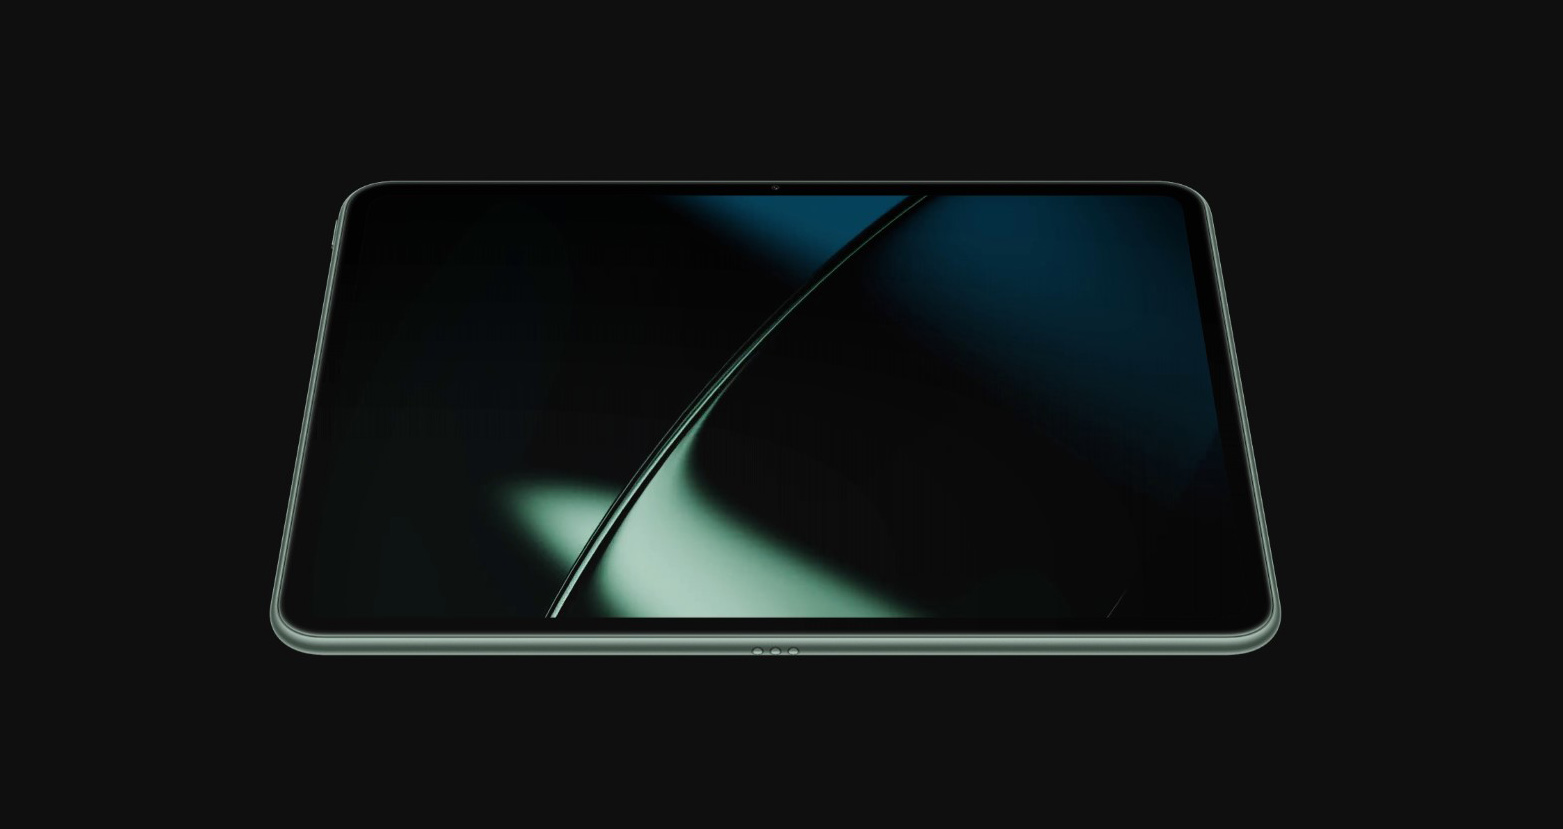 OnePlus Pad Pro Gets Its First Teaser, Company Is Calling It The Most Powerful Android Tablet, Hinting At Impressive Specifications